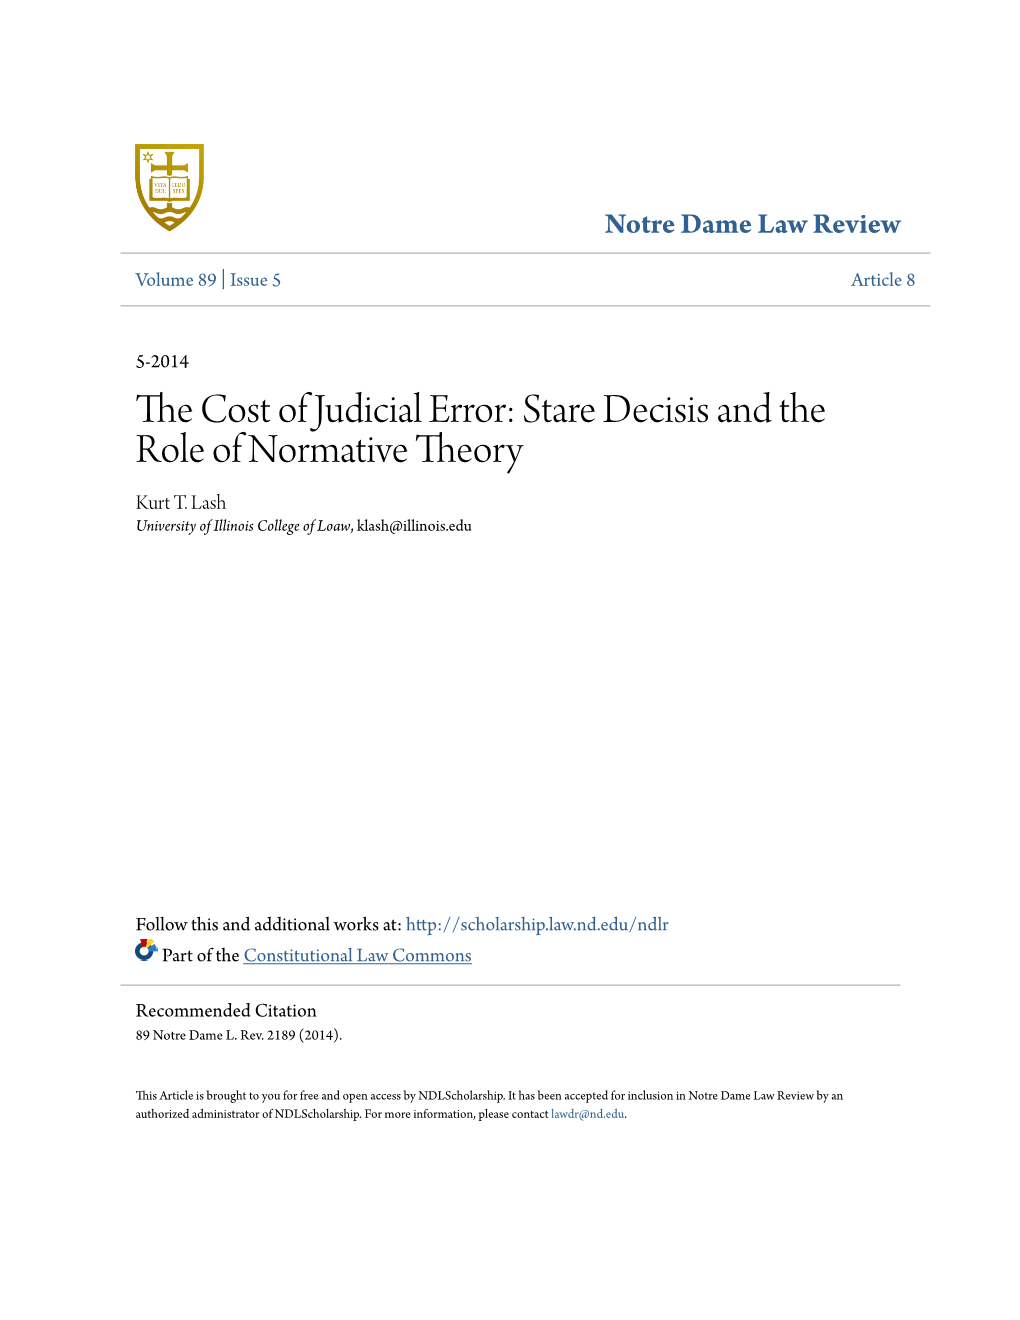 The Cost of Judicial Error: Stare Decisis and the Role of Normative Theory